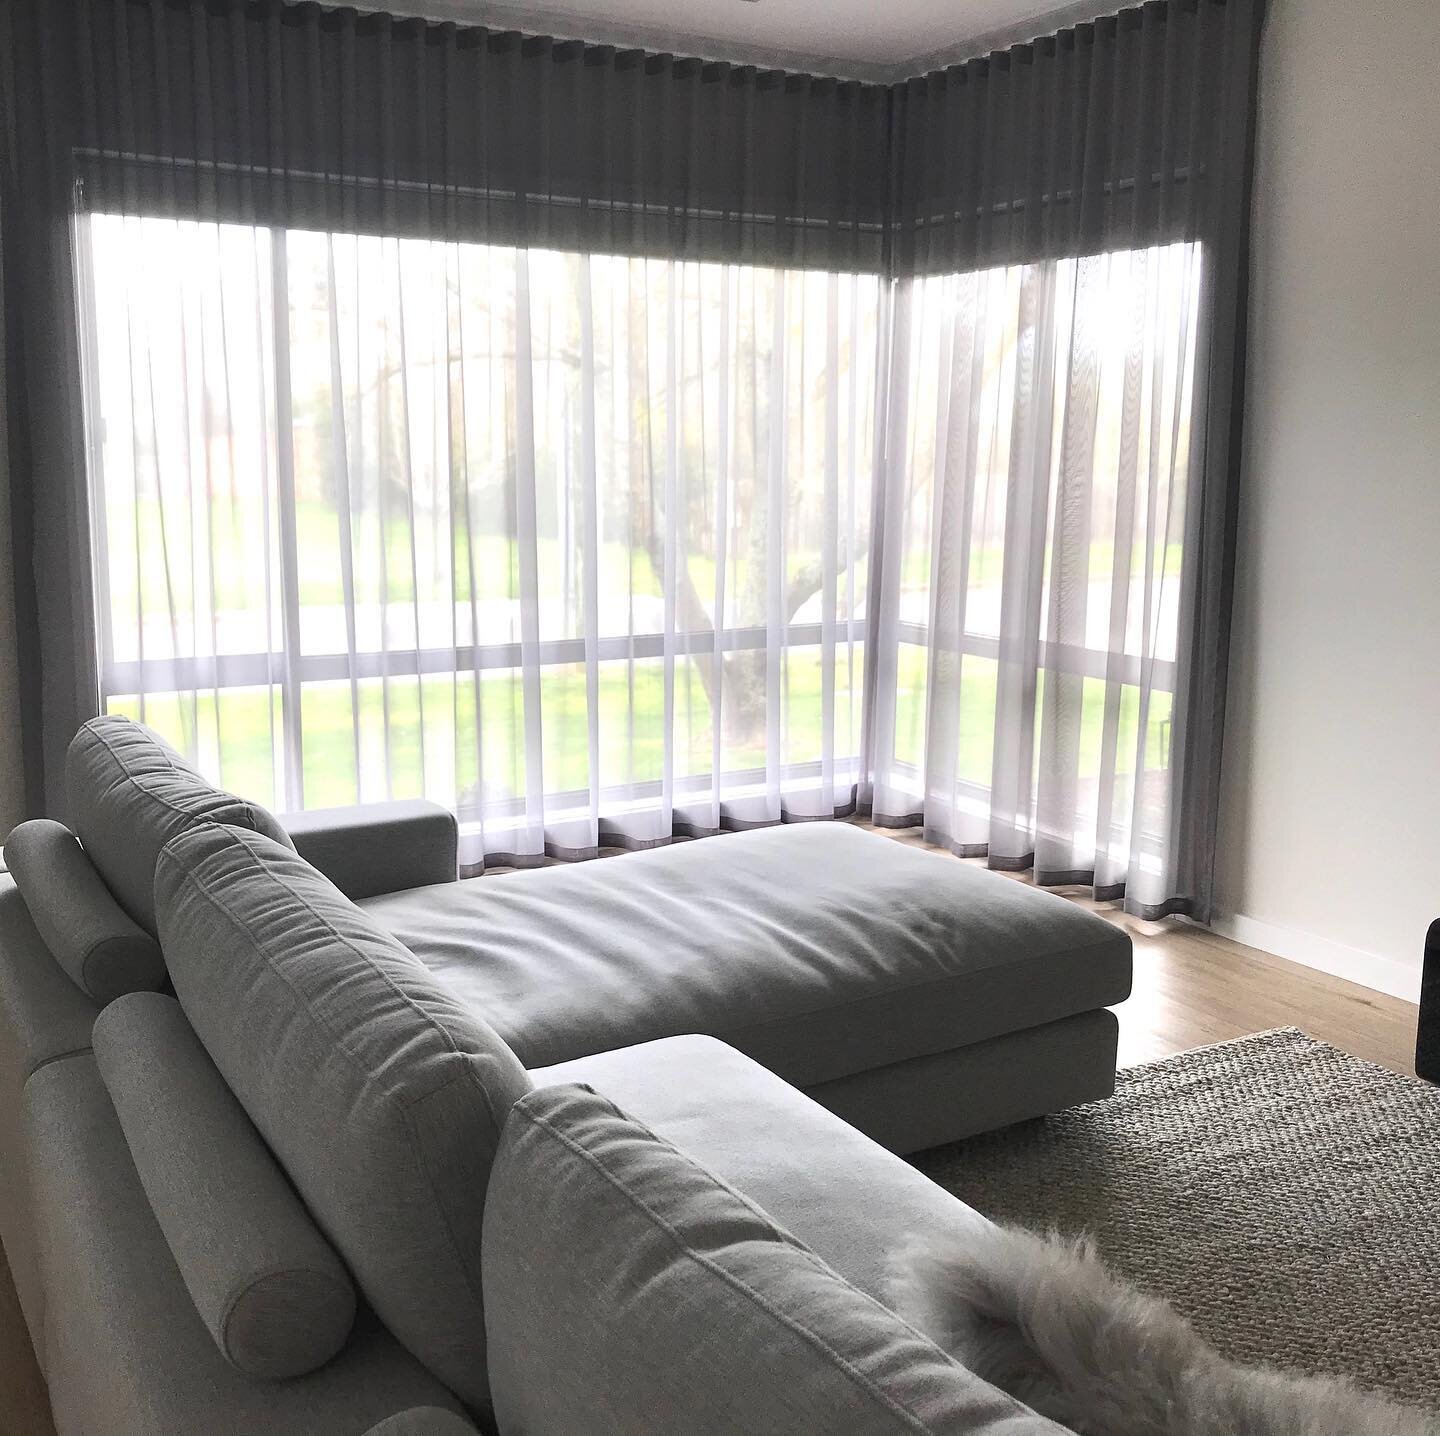 Hung the curtains today and delivered the rug. The room is coming together just need to add the scatter cushions. #thatspeciallookinteriordesign #sfoldcurtains #weaverugs #warwickfabrics